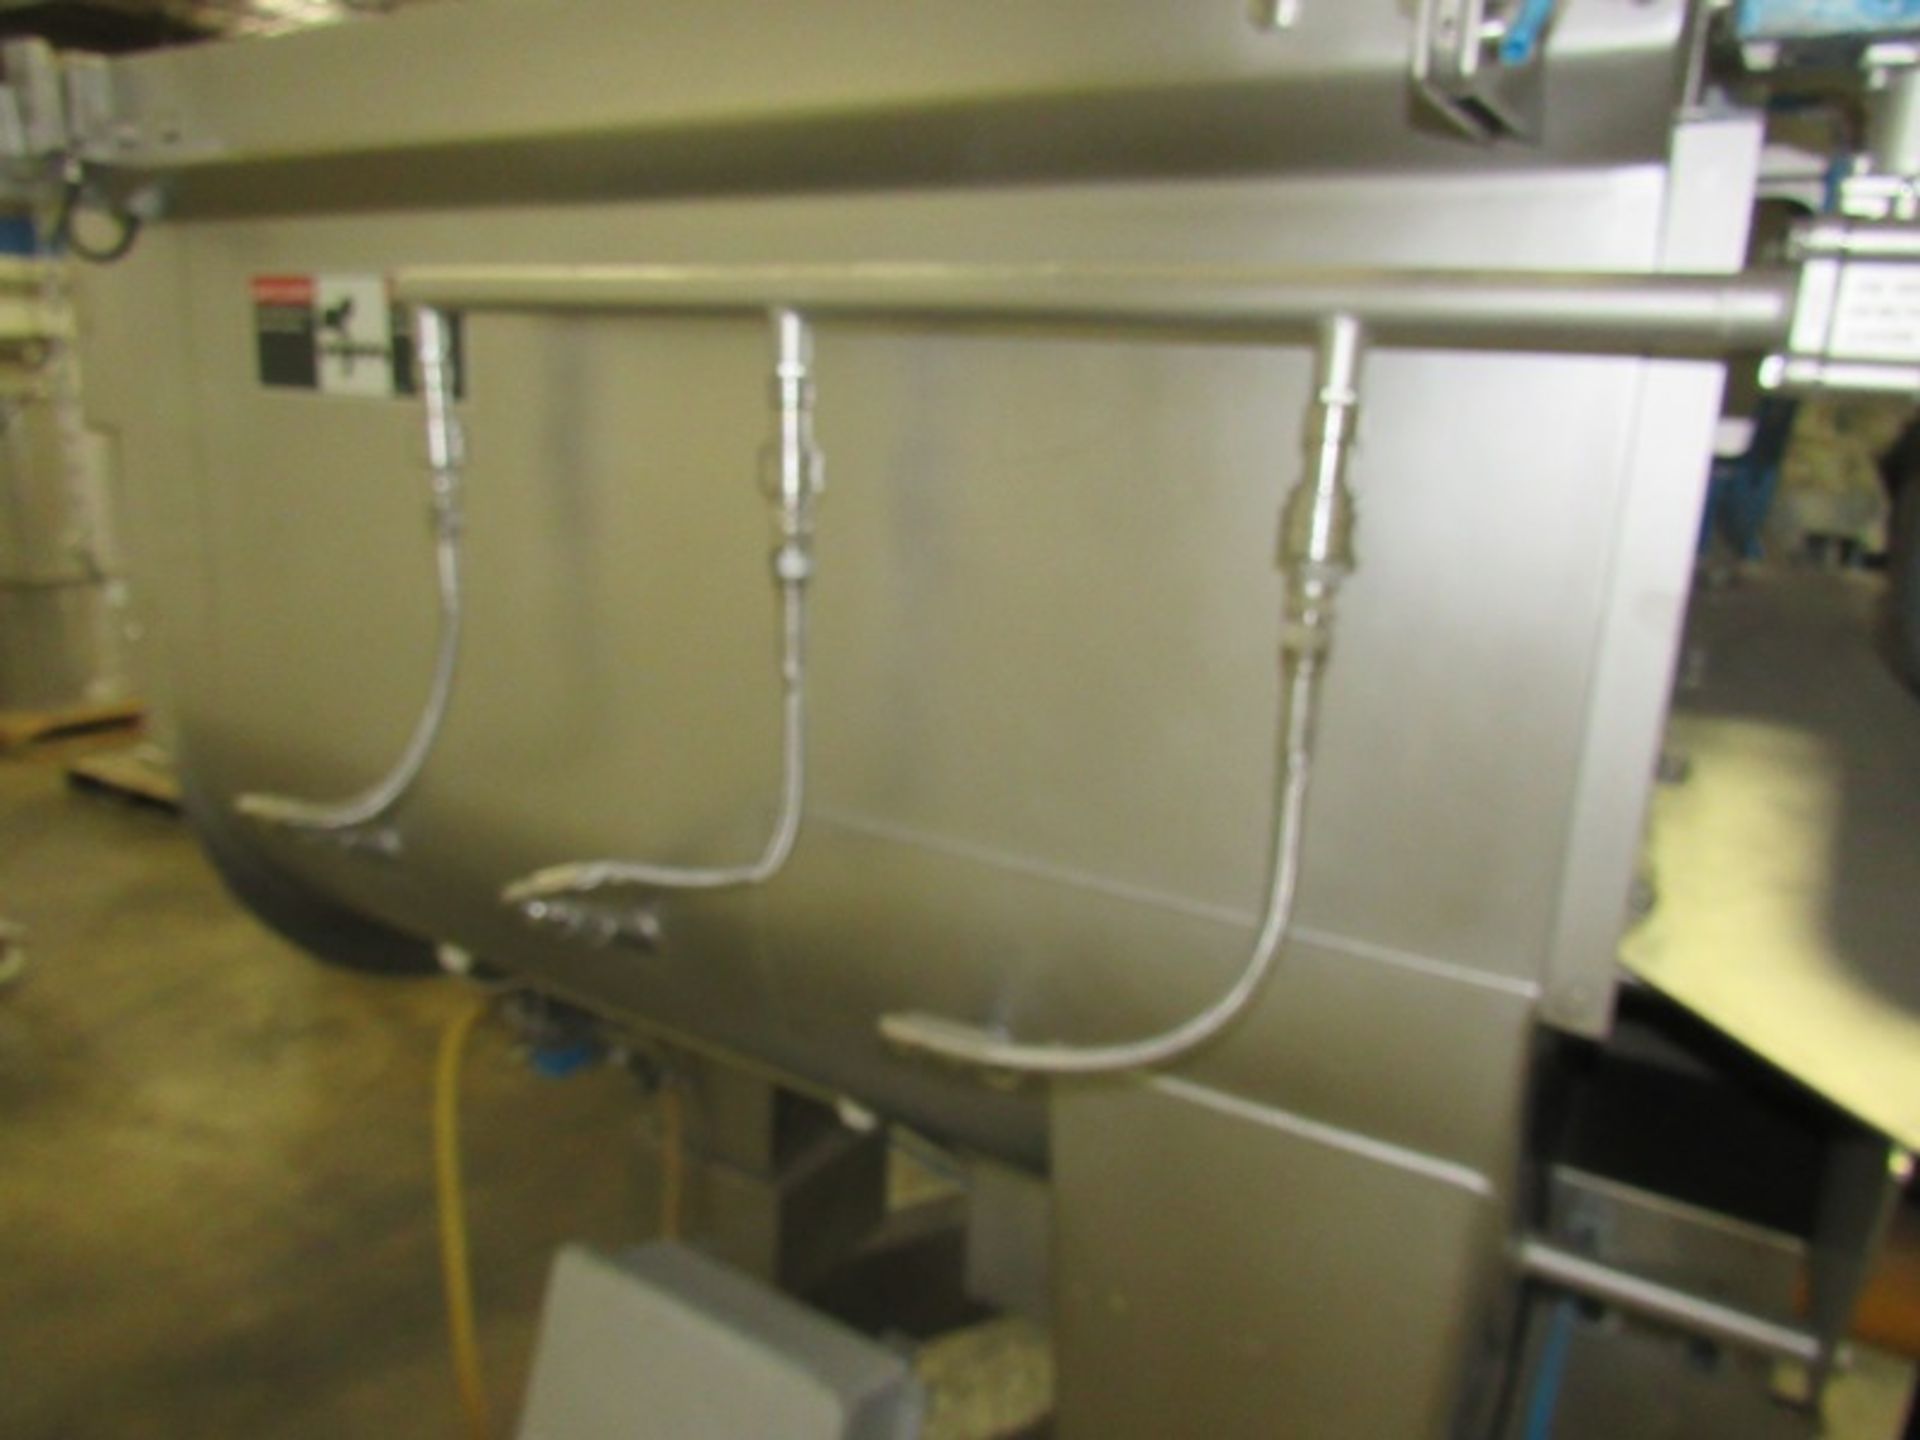 CFS Mdl. Combi Grind 1000 Stainless Steel Mixer/Grinder, dual agitation paddles, bottom injected CO2 - Image 5 of 12